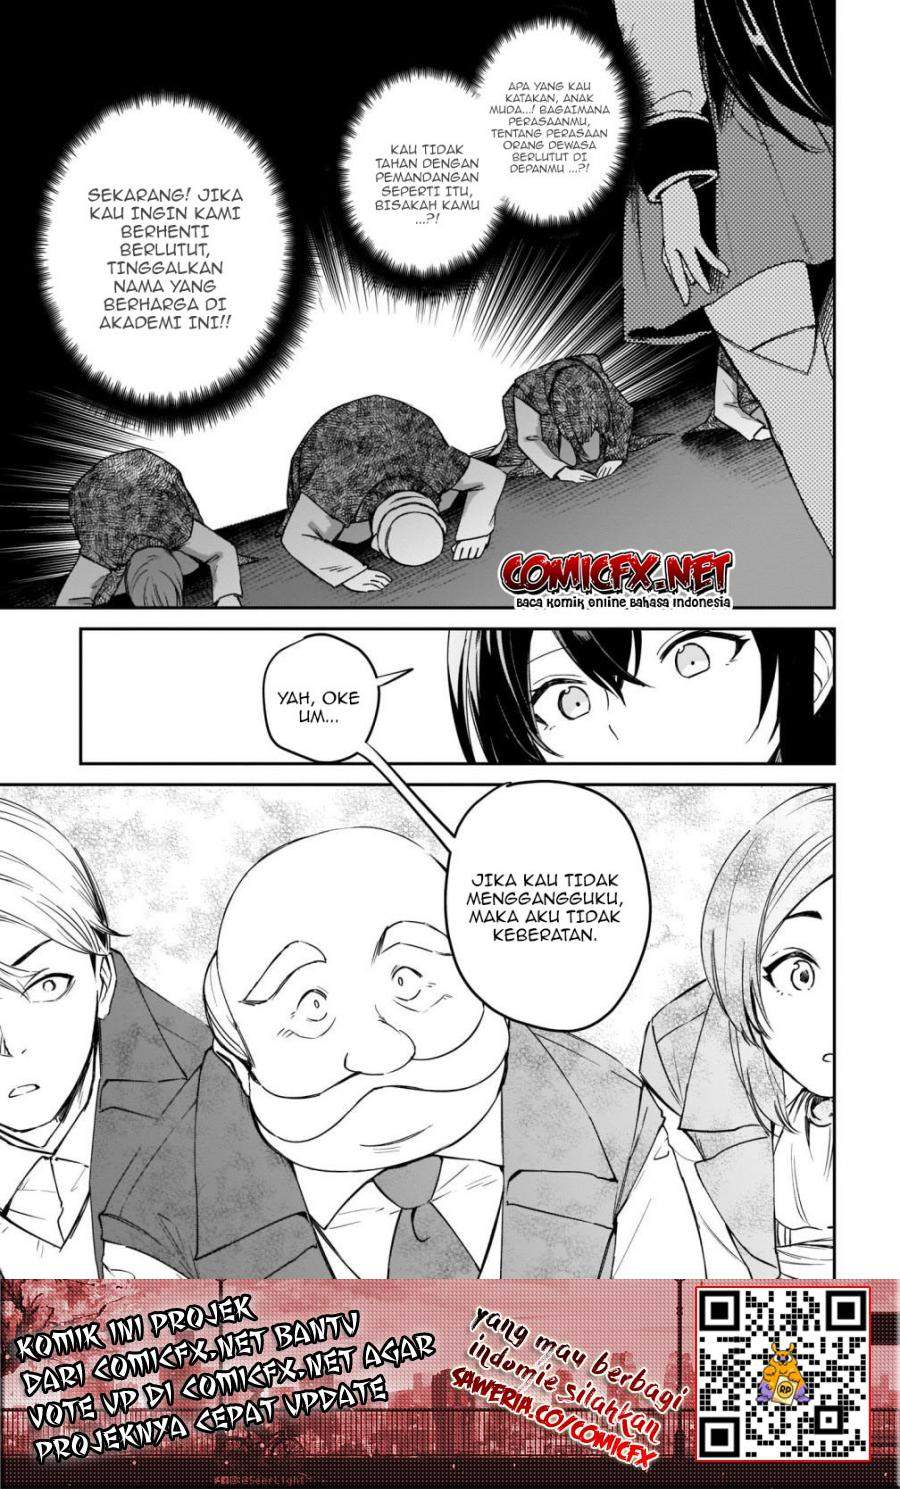 Saint? No, Just a Passing Monster Tamer! ~The Completely Unparalleled Saint Travels with Fluffies~ Chapter 02.2